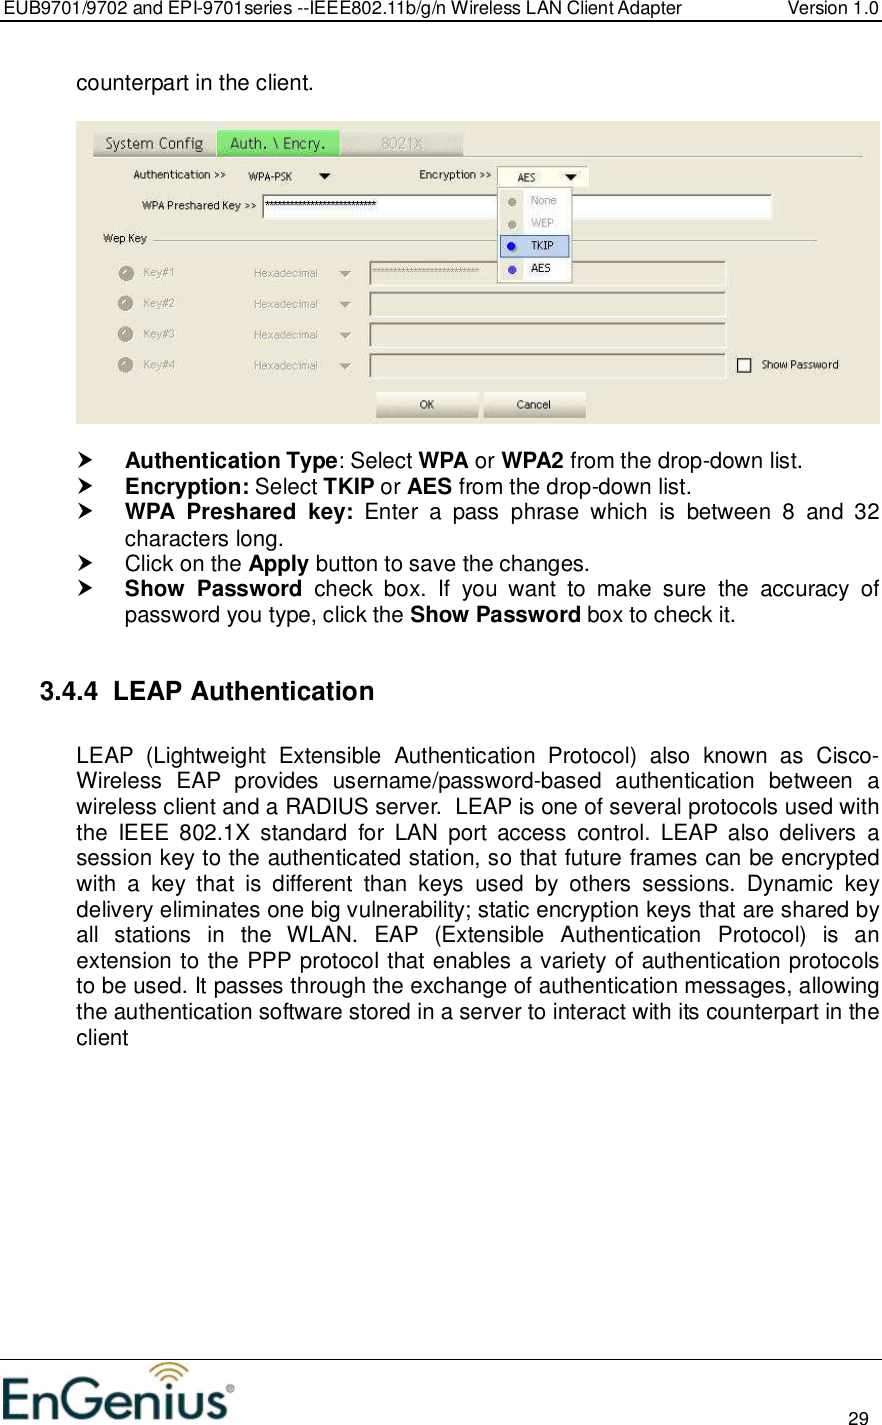 EUB9701/9702 and EPI-9701series --IEEE802.11b/g/n Wireless LAN Client Adapter  Version 1.0                                                                                                                          29  counterpart in the client.     Authentication Type: Select WPA or WPA2 from the drop-down list.   Encryption: Select TKIP or AES from the drop-down list.   WPA  Preshared  key:  Enter  a  pass  phrase  which  is  between  8  and  32 characters long.    Click on the Apply button to save the changes.   Show  Password  check  box.  If  you  want  to  make  sure  the  accuracy  of password you type, click the Show Password box to check it.  3.4.4  LEAP Authentication   LEAP  (Lightweight  Extensible  Authentication  Protocol)  also  known  as  Cisco-Wireless  EAP  provides  username/password-based  authentication  between  a wireless client and a RADIUS server.  LEAP is one of several protocols used with the  IEEE  802.1X  standard  for  LAN  port  access  control.  LEAP also  delivers  a session key to the authenticated station, so that future frames can be encrypted with  a  key  that  is  different  than  keys  used  by  others  sessions.  Dynamic  key delivery eliminates one big vulnerability; static encryption keys that are shared by all  stations  in  the  WLAN.  EAP  (Extensible  Authentication  Protocol)  is  an extension to the PPP protocol that enables a variety of authentication protocols to be used. It passes through the exchange of authentication messages, allowing the authentication software stored in a server to interact with its counterpart in the client  